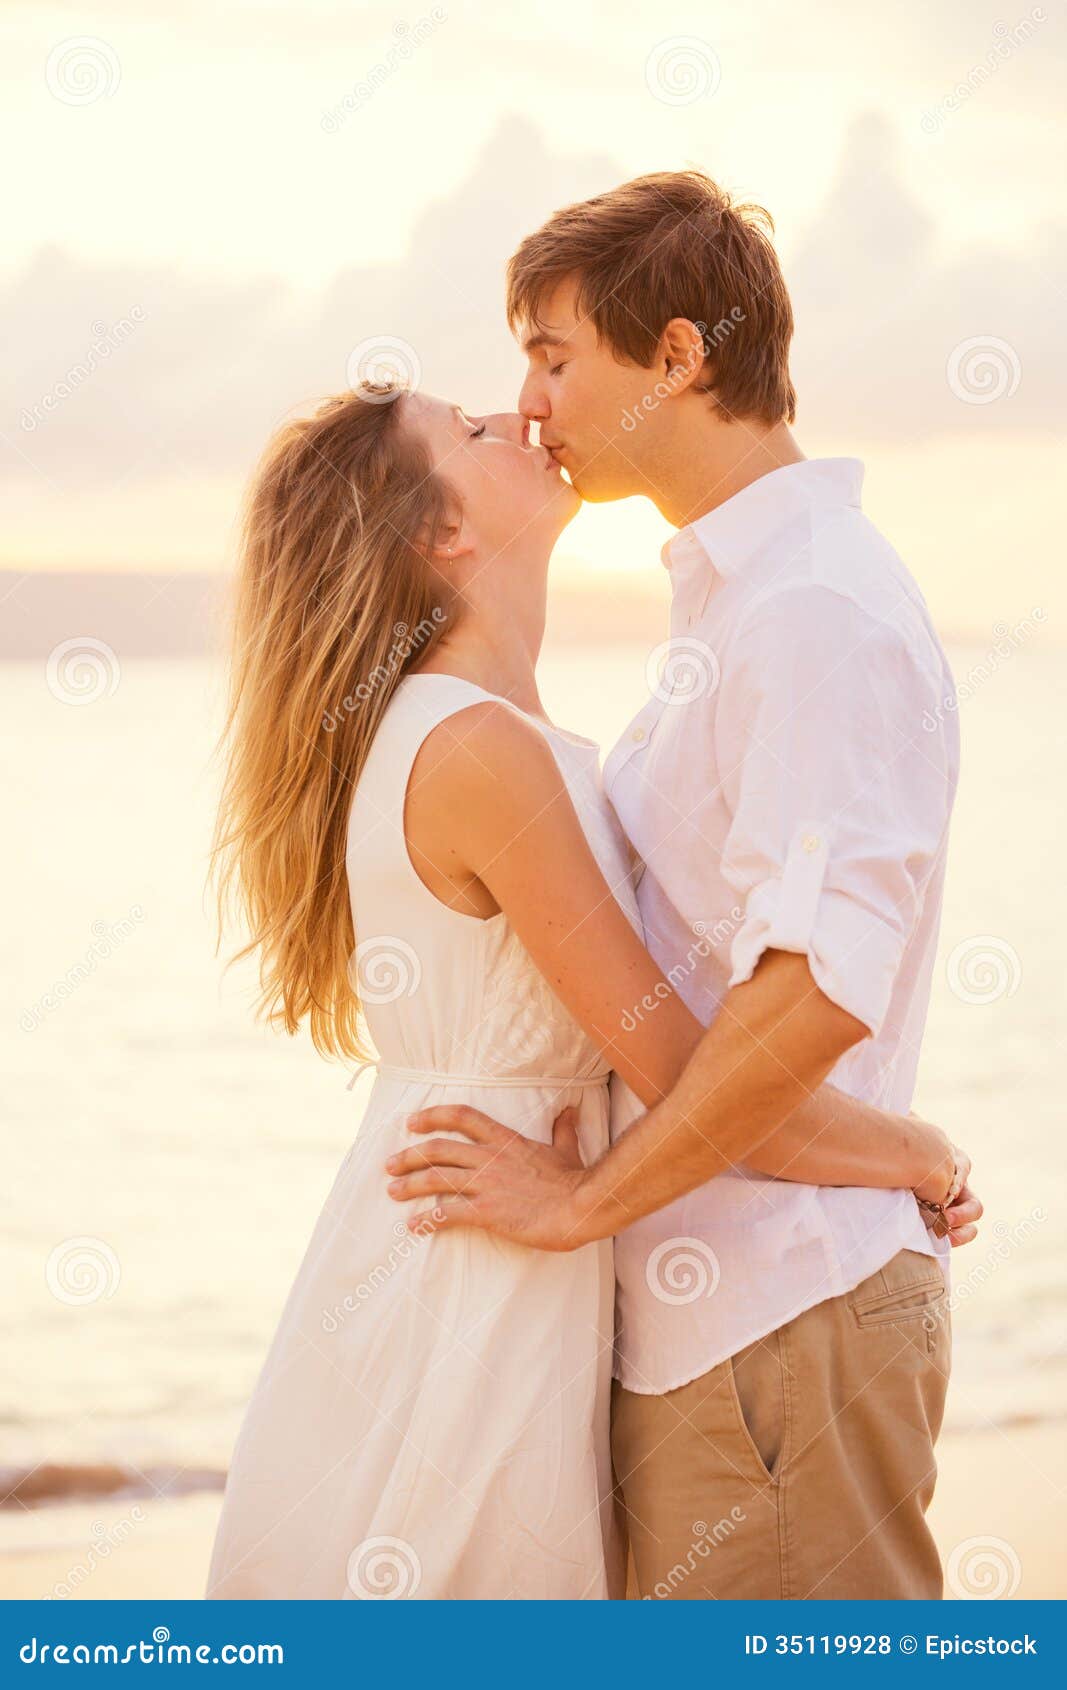 Happy Romantic Couple Kissing on the Beach at Sunset Stock Photo ...